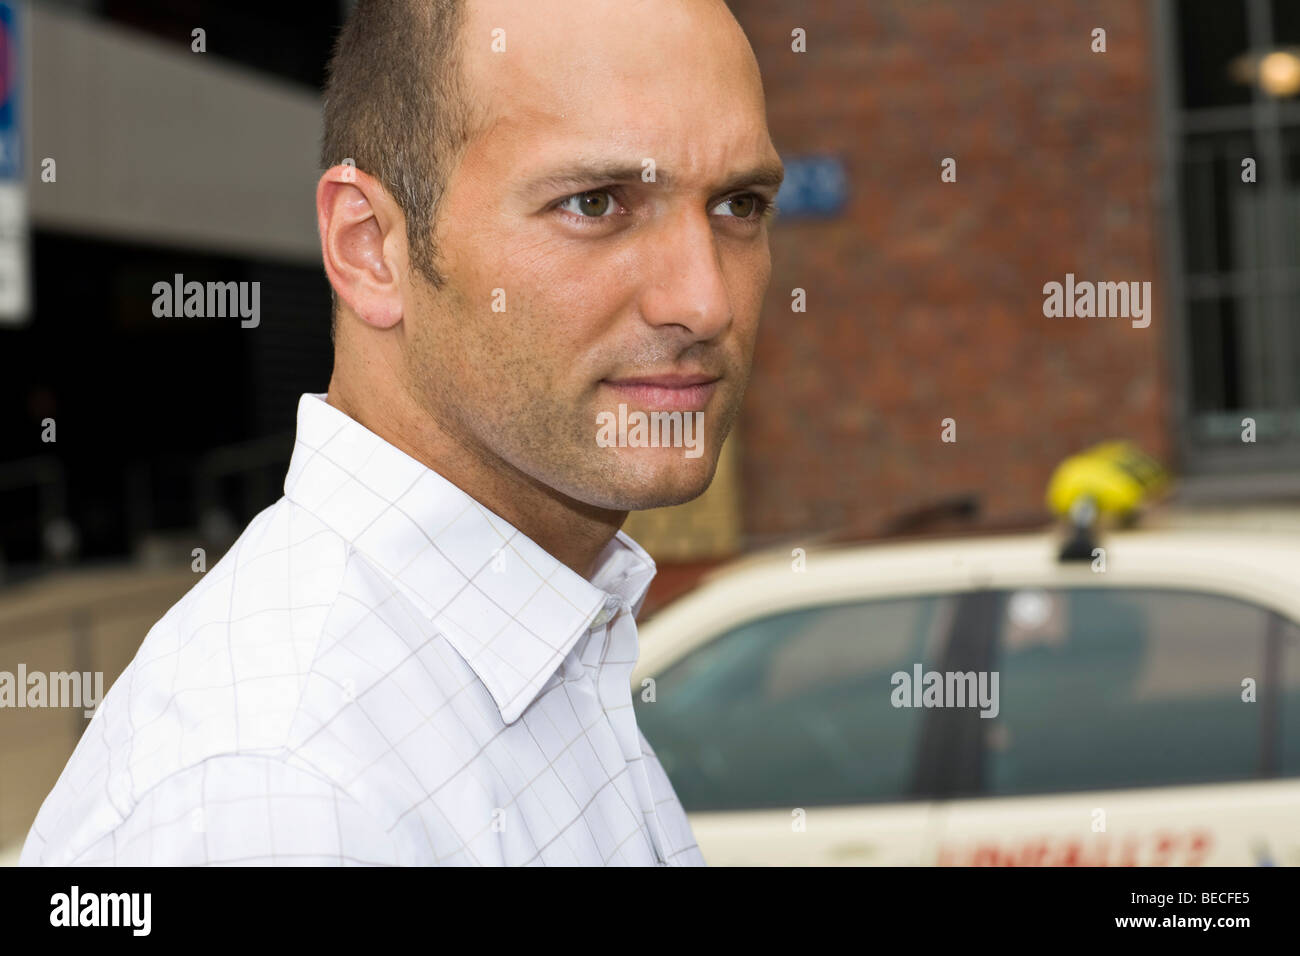 Young businessman Stock Photo